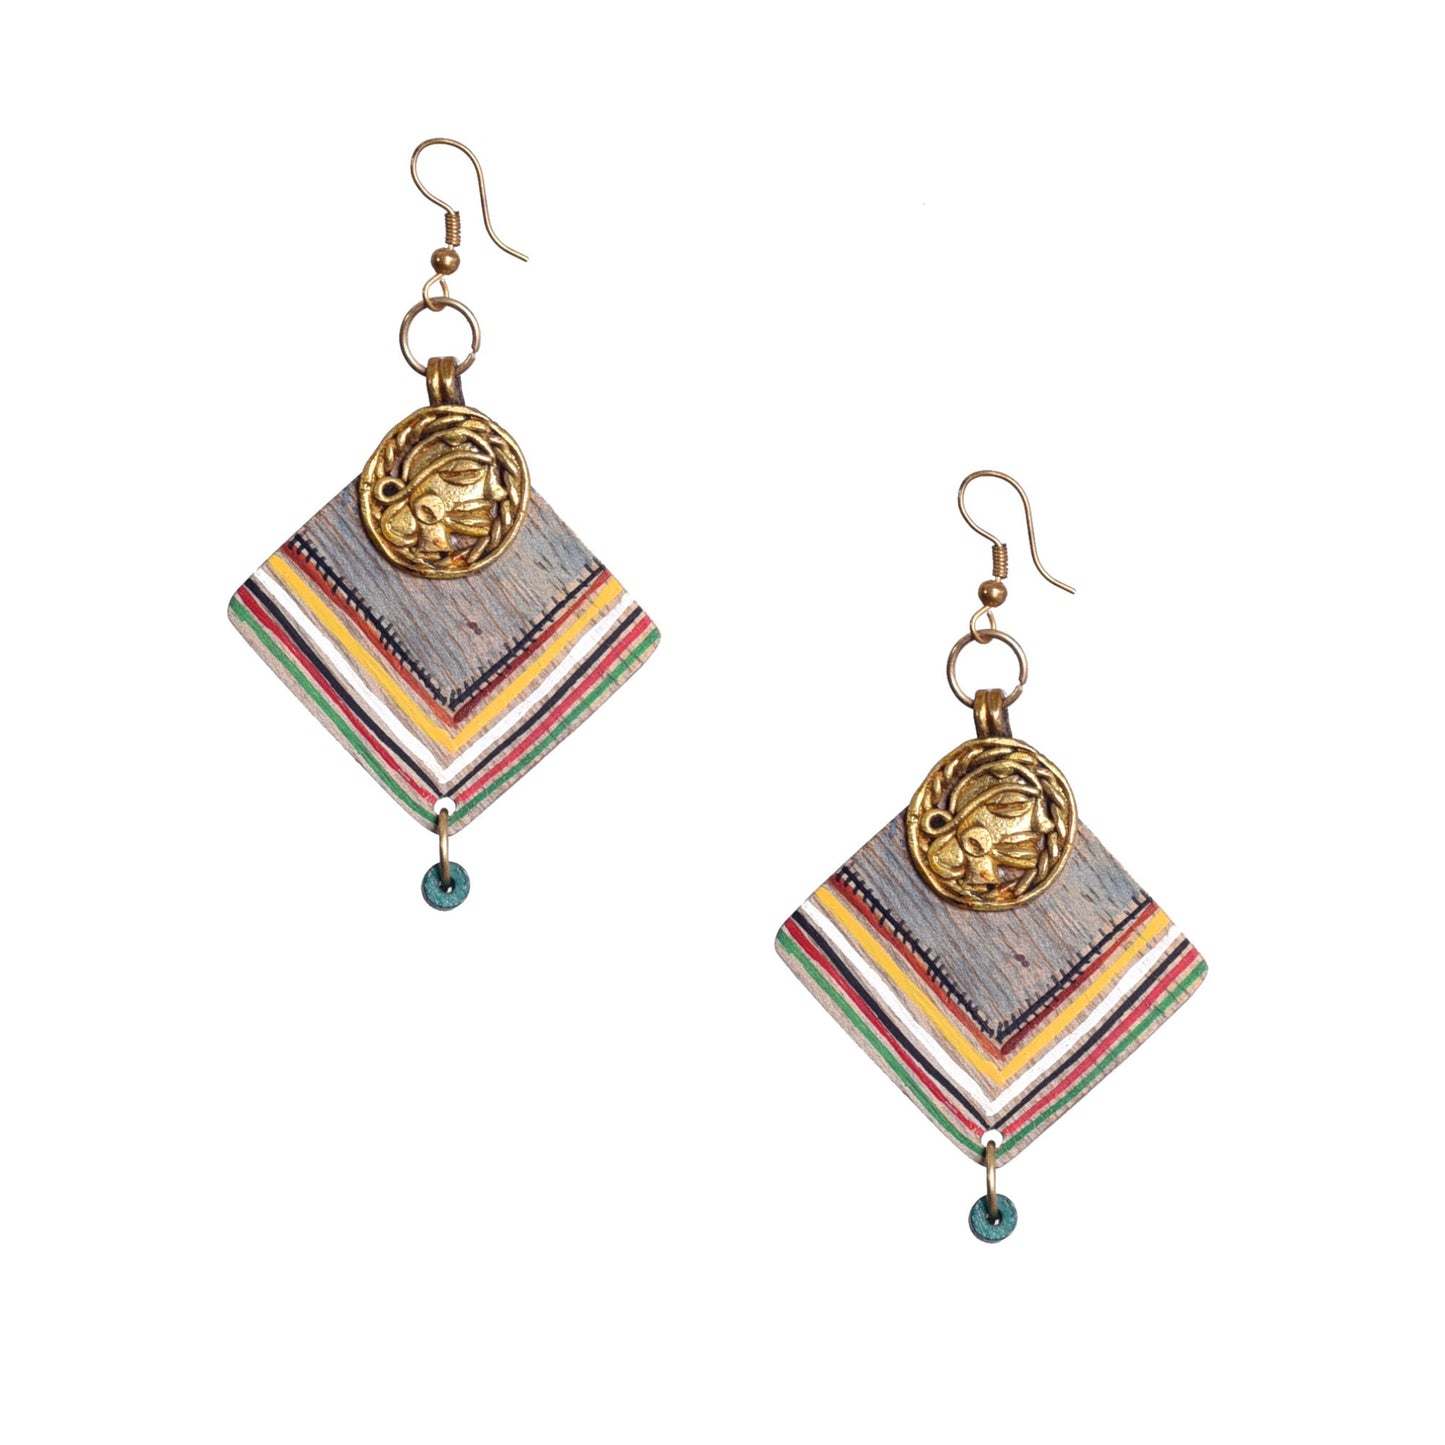 Boho Chic: Handcrafted Wooden Earrings with Brass Motifs